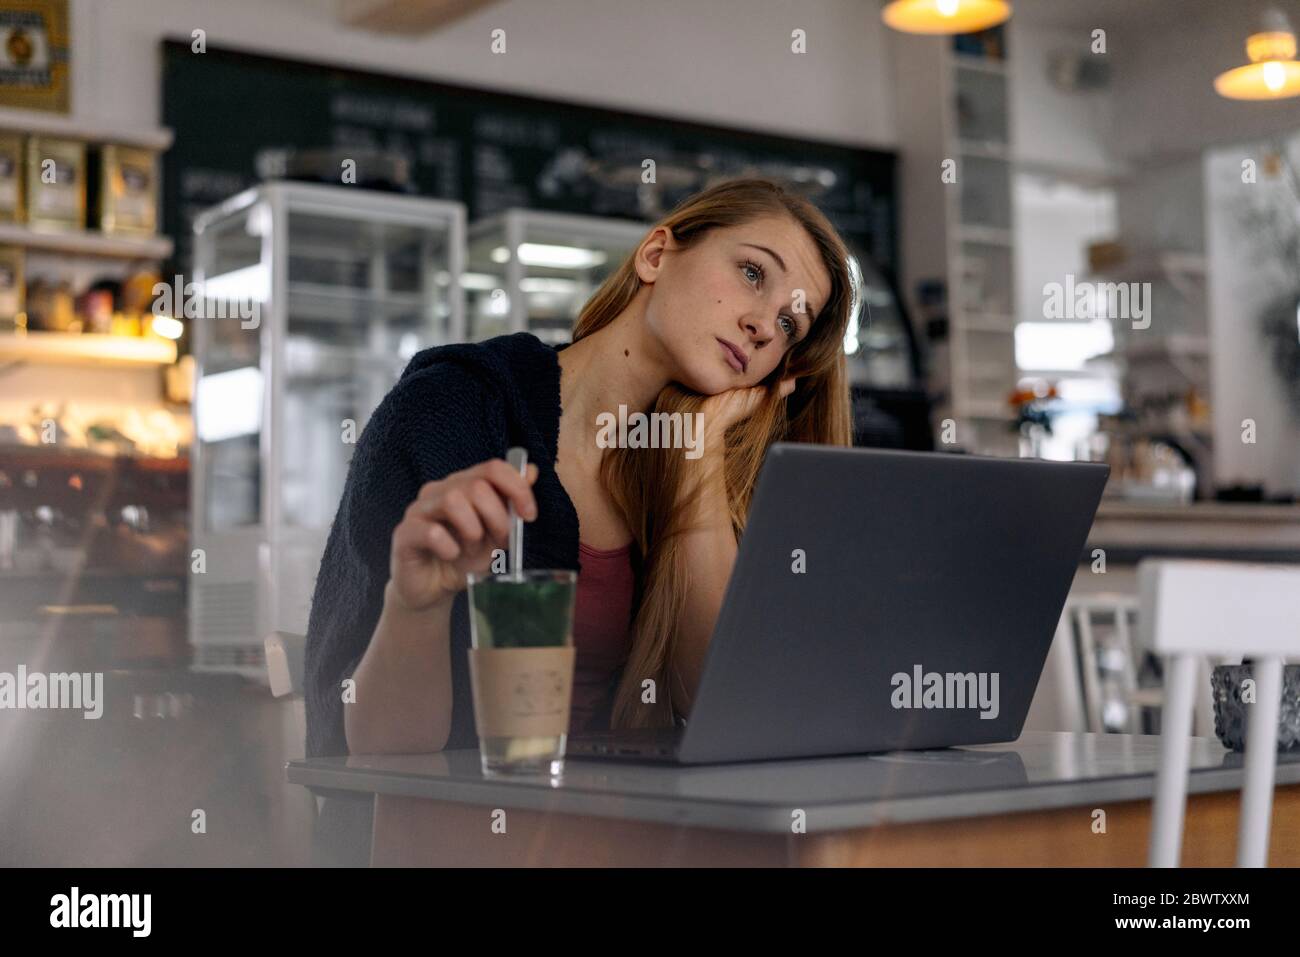 Daydreaming young woman with laptop in a cafe Stock Photo